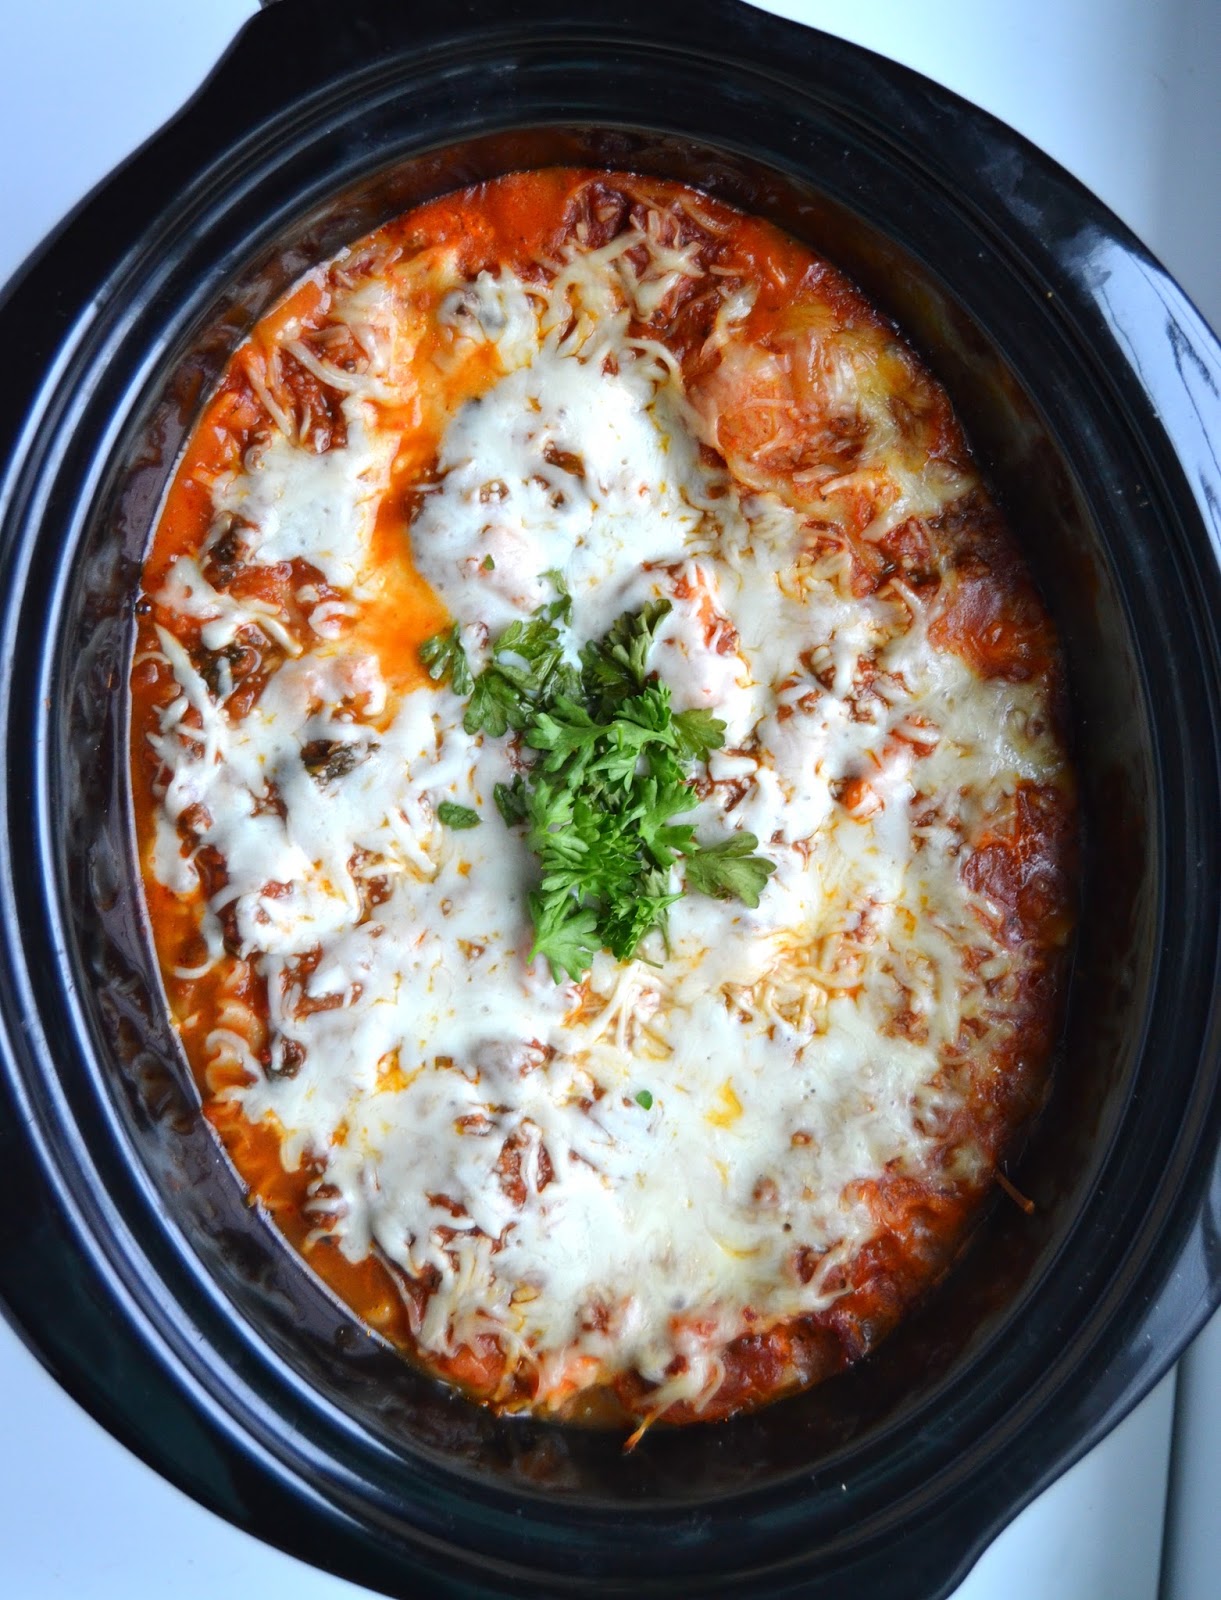 The Nutritionist Reviews: Slow Cooker Veggie Loaded Lasagna